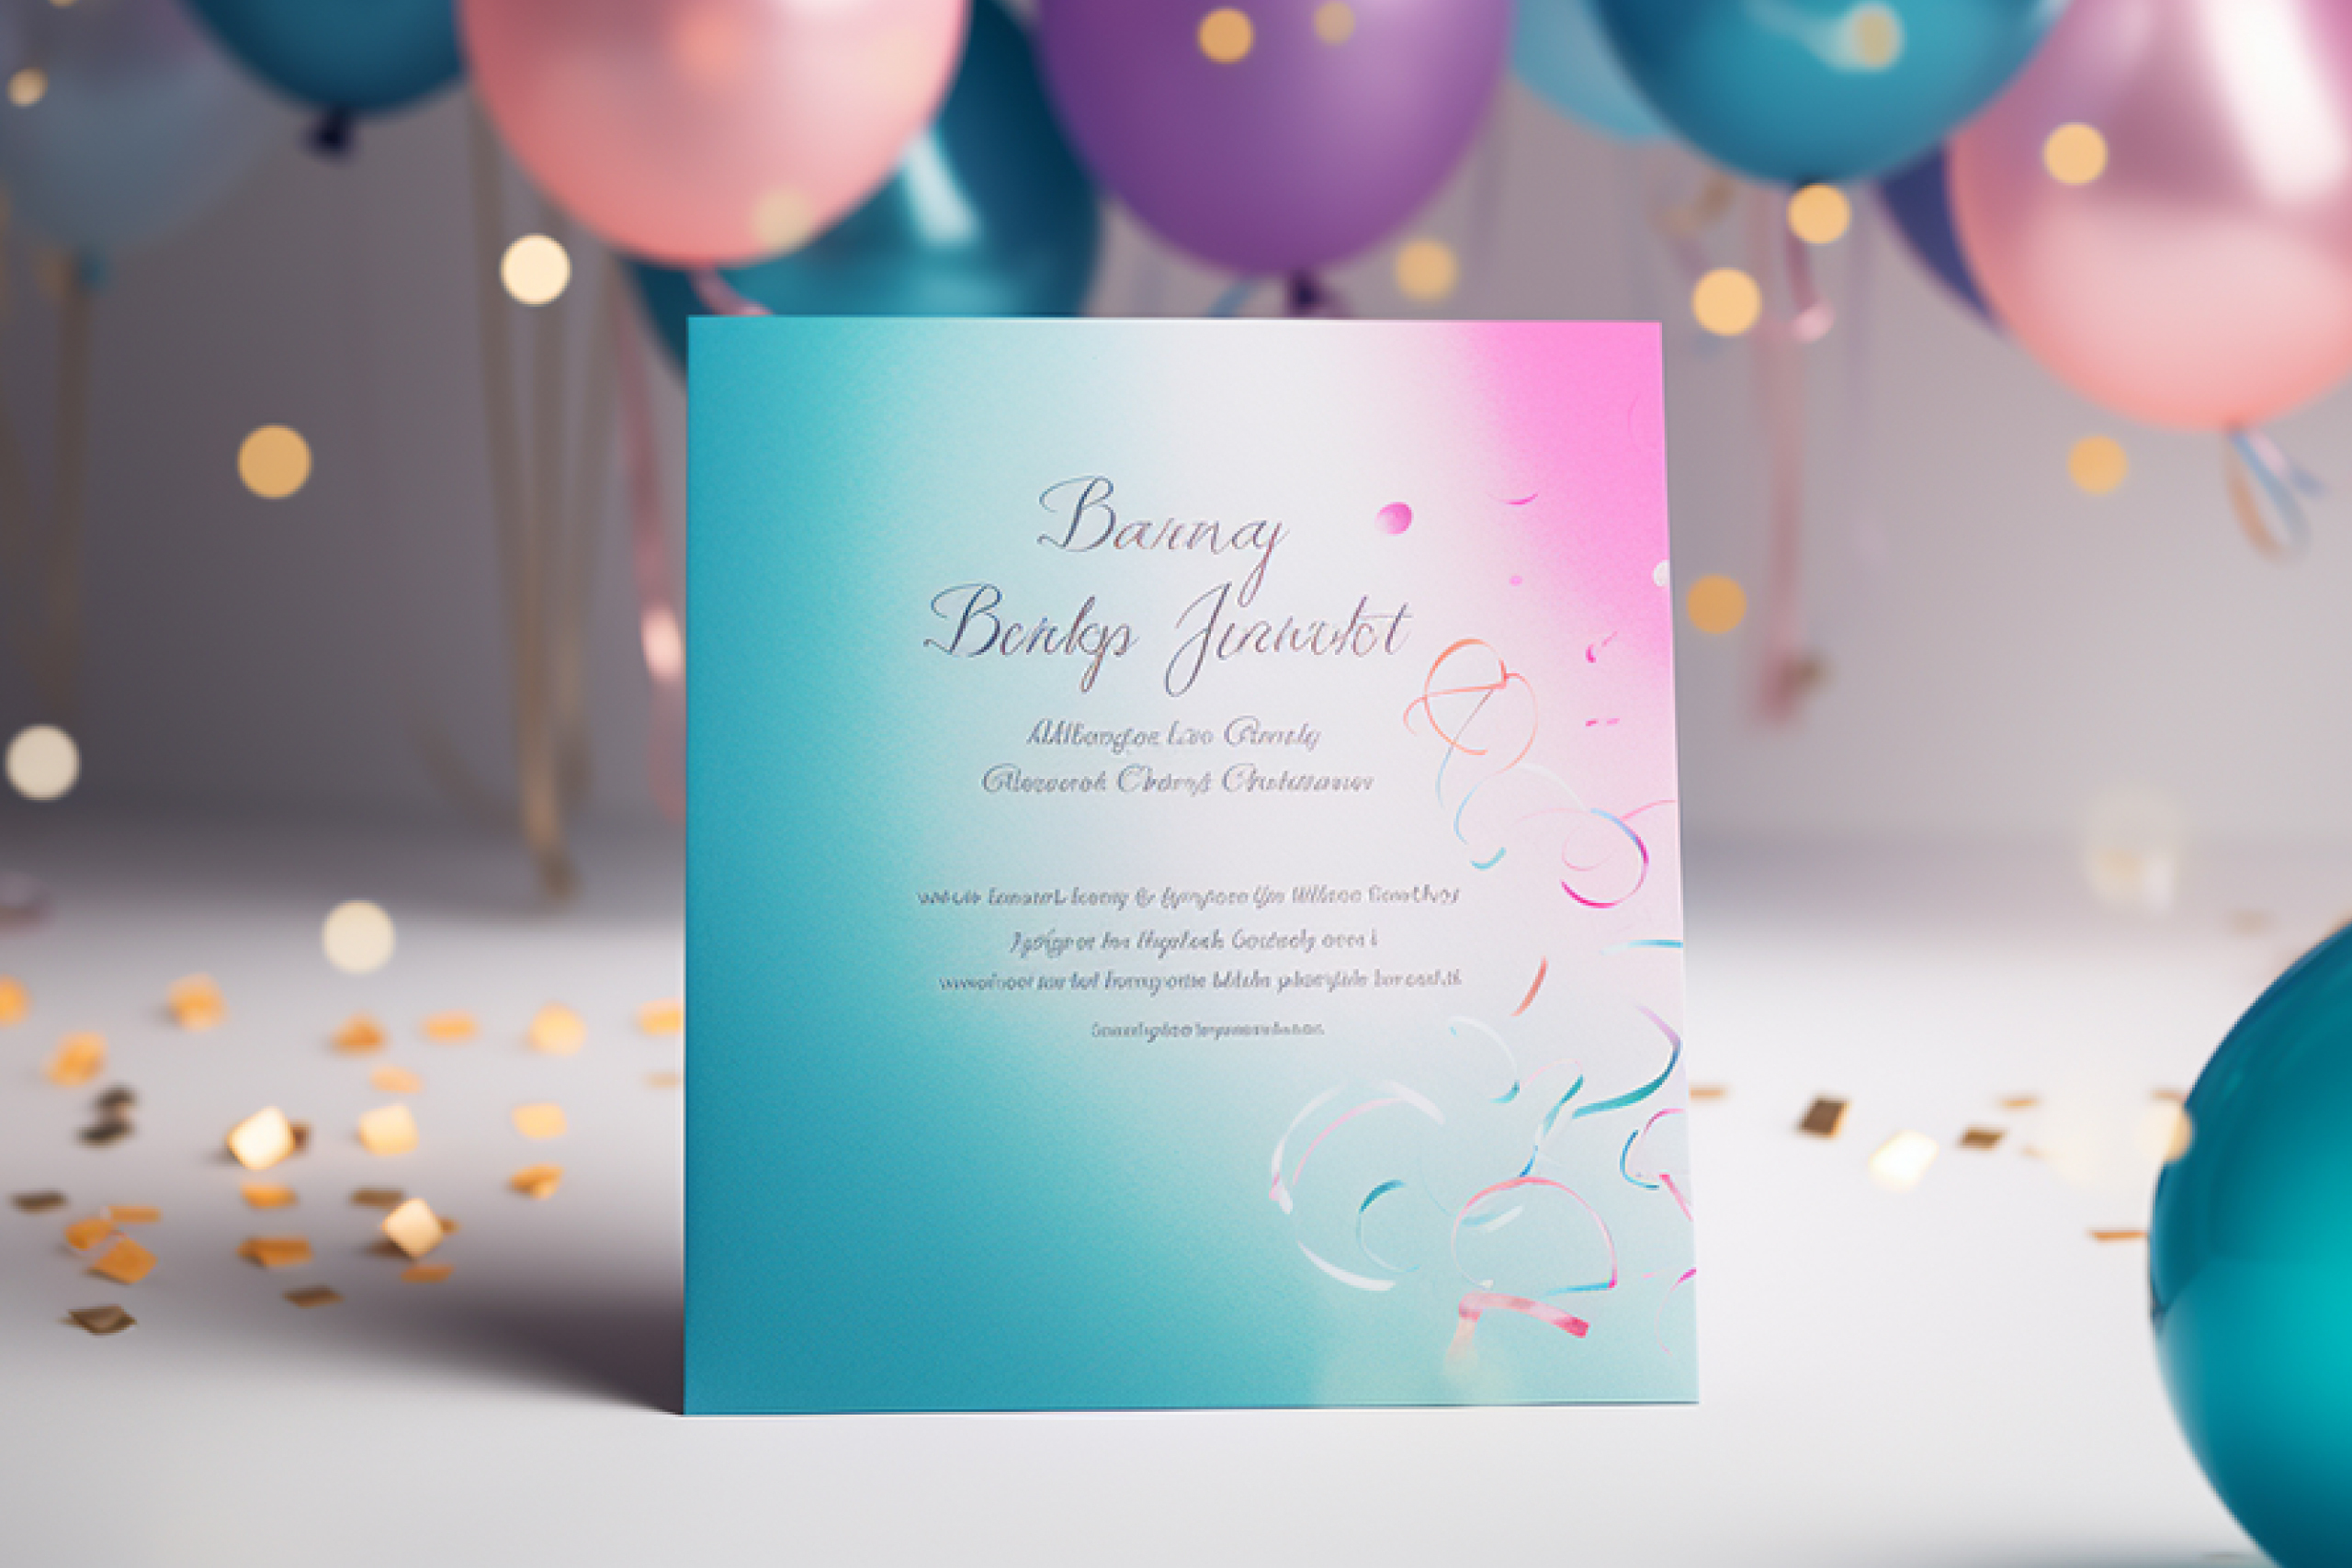 Creating Invitations: Why the Perfect Tone Sets the Stage for a Memorable Event